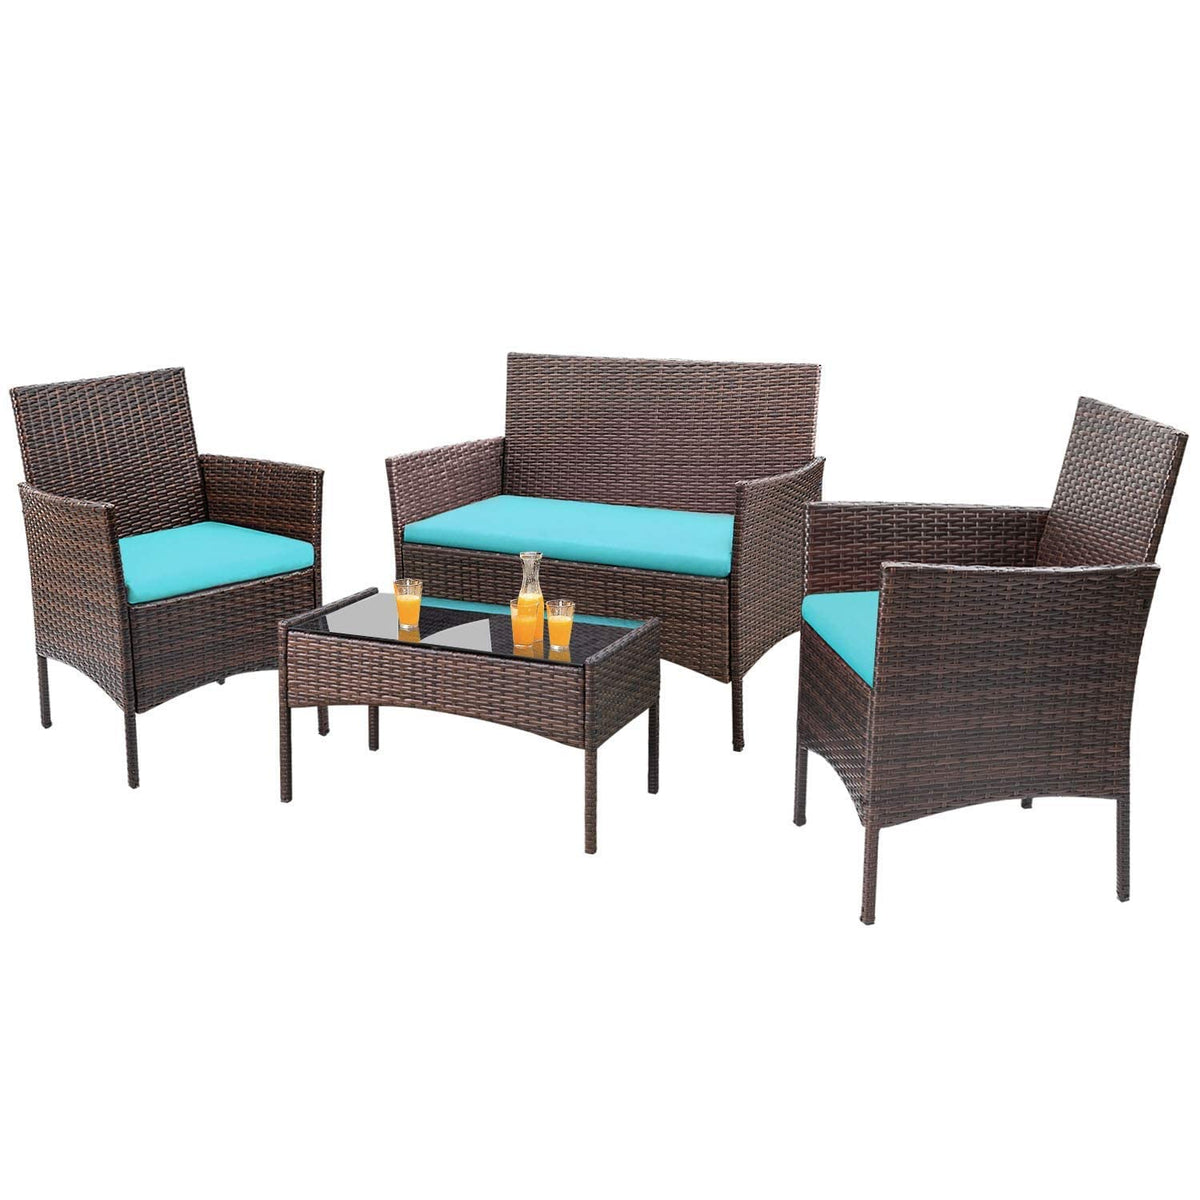 Homall 4 Pieces Patio Rattan Chair Wicker